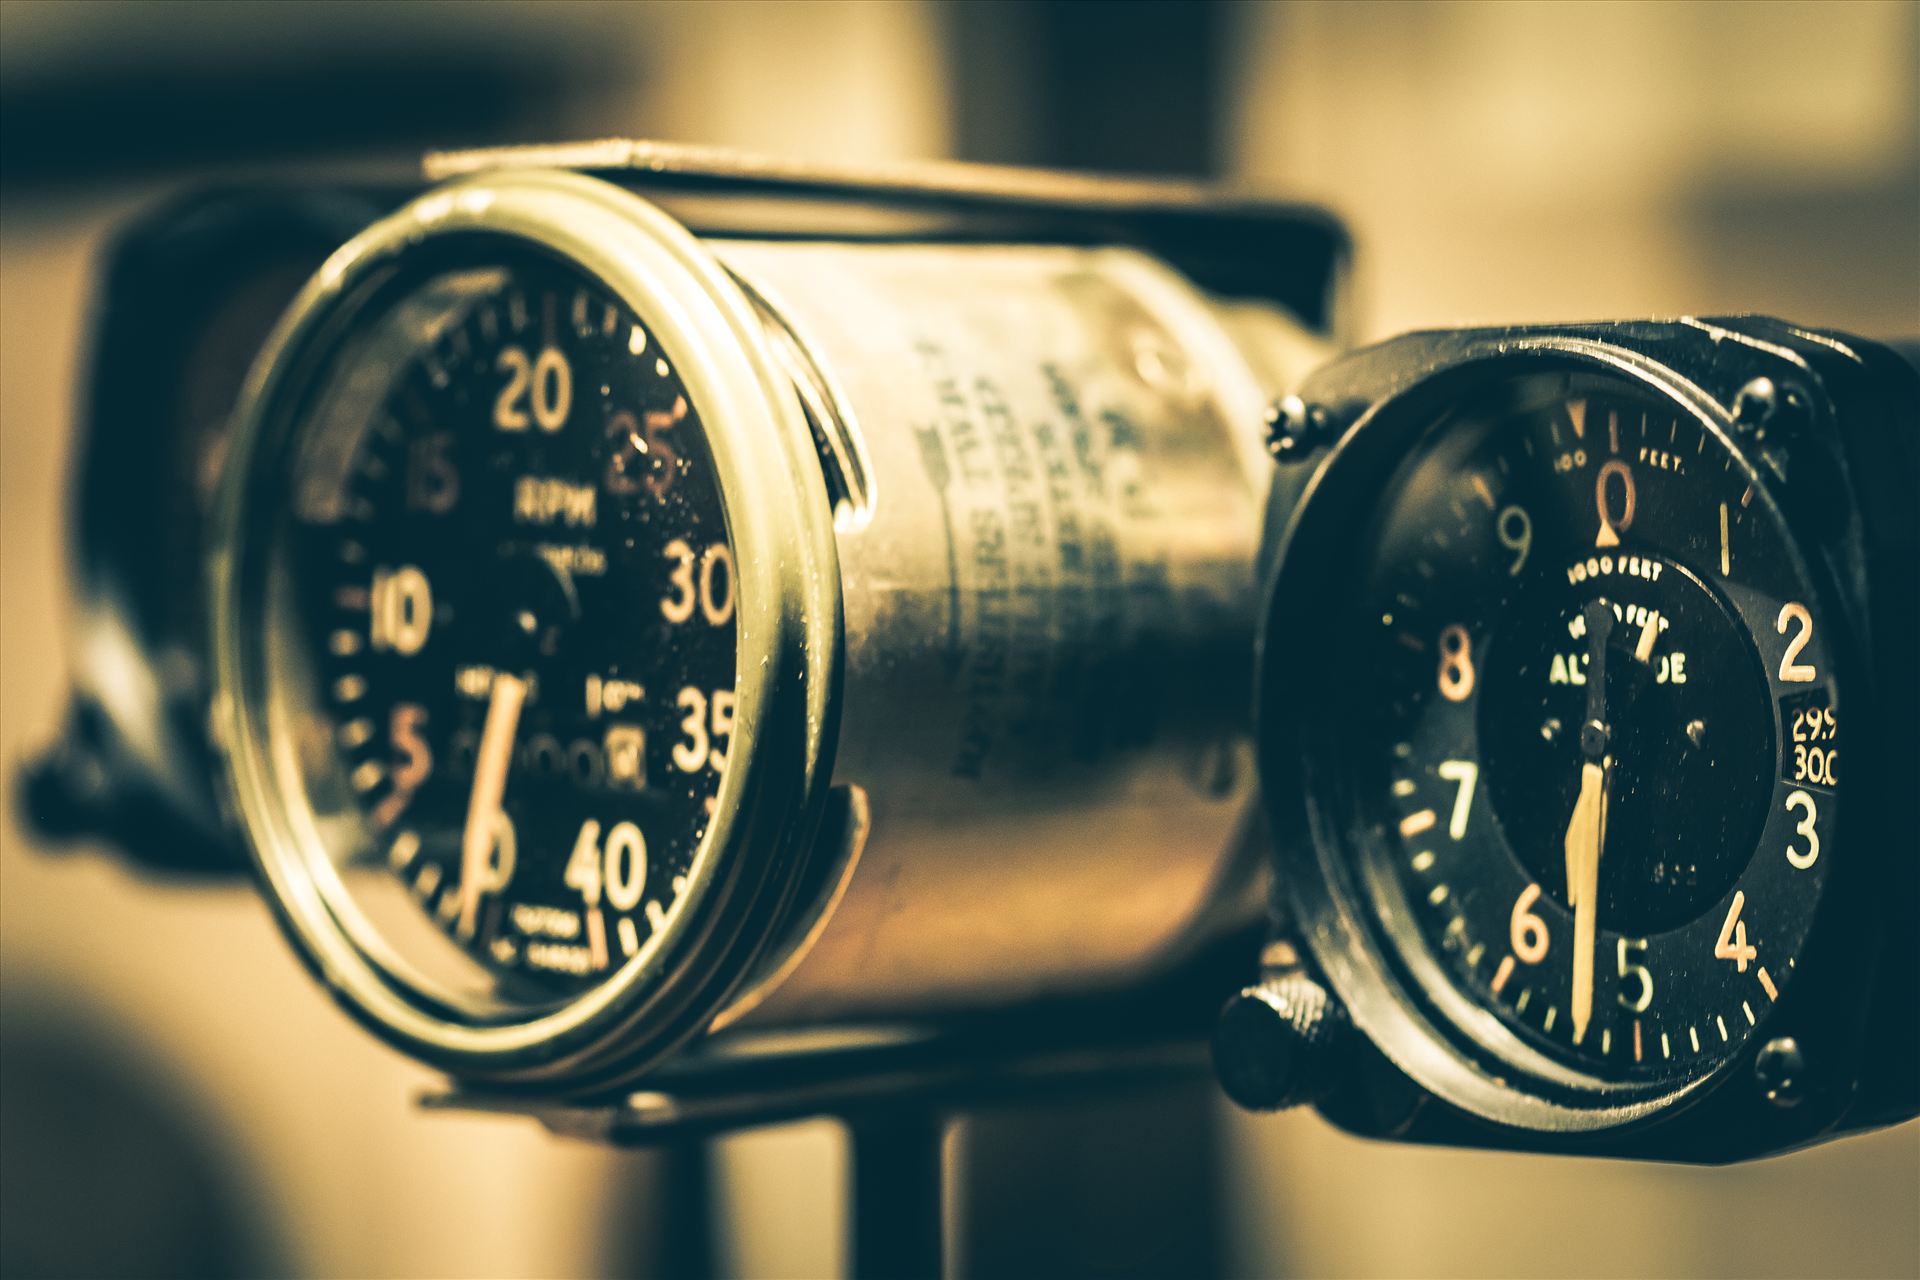 Dial it In - Vintage aviation gauges at the Ghurka store. by Scott Smith Photos